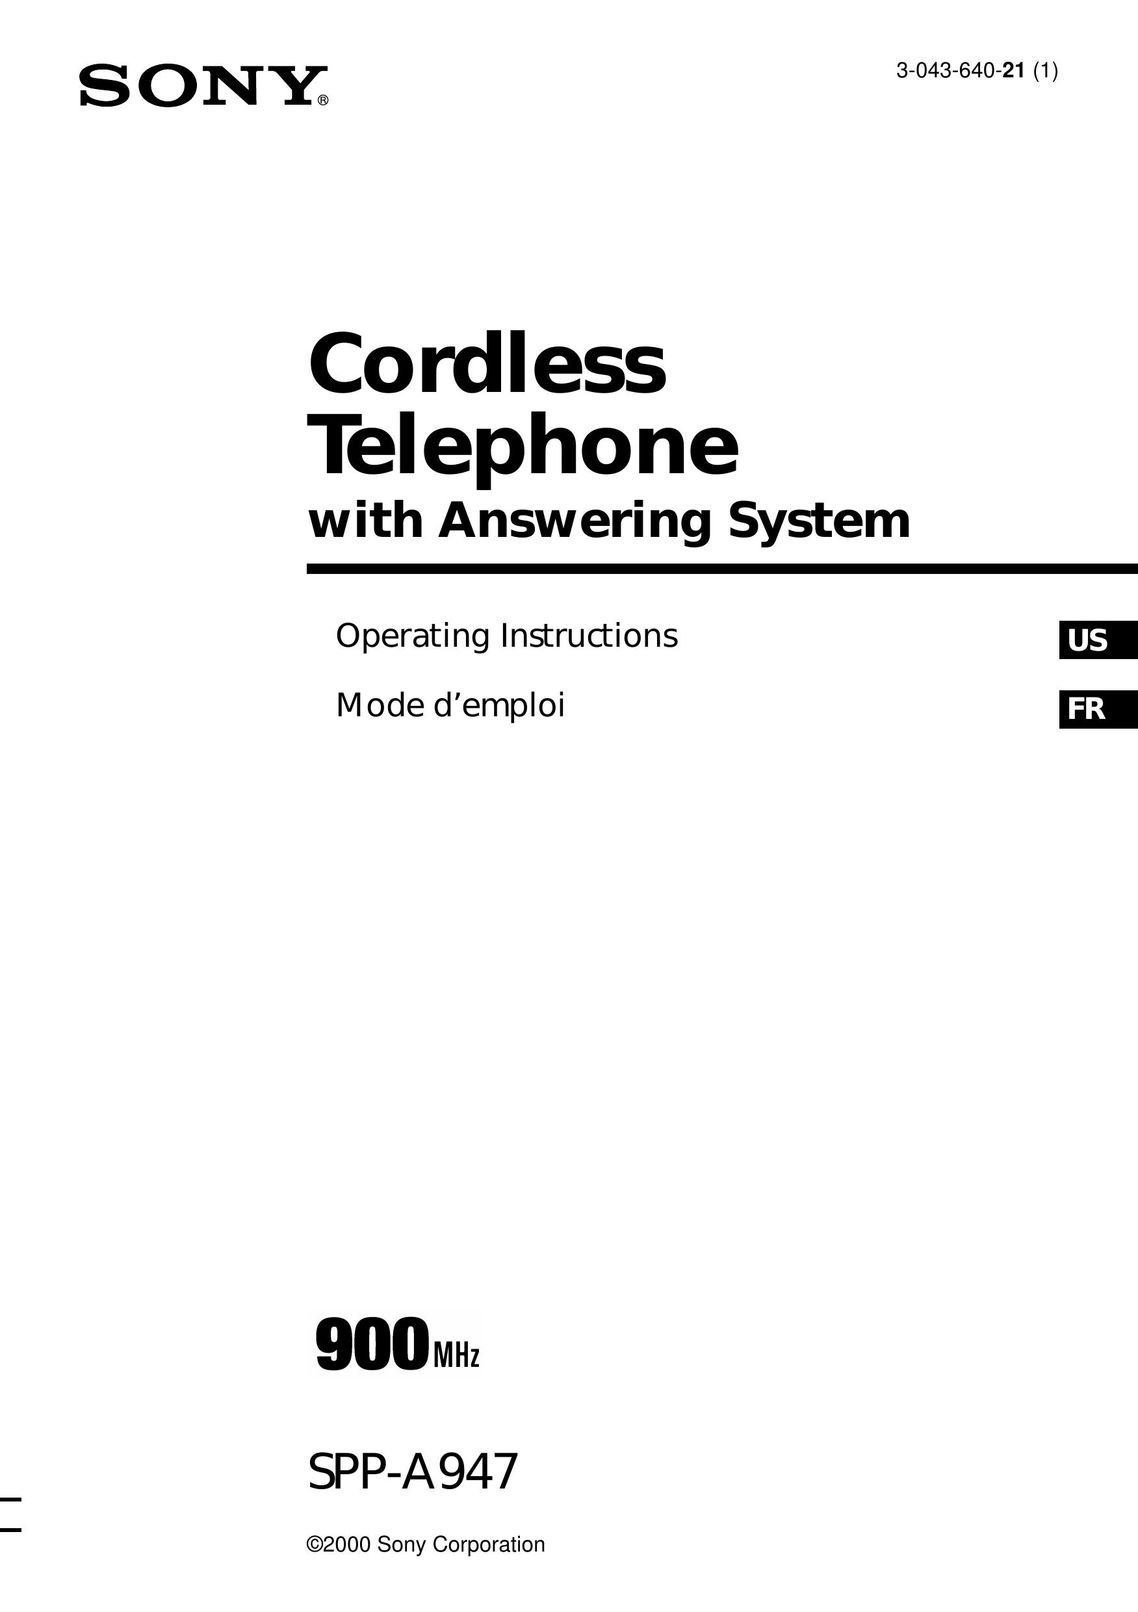 Sony SPP-A947 Cordless Telephone User Manual